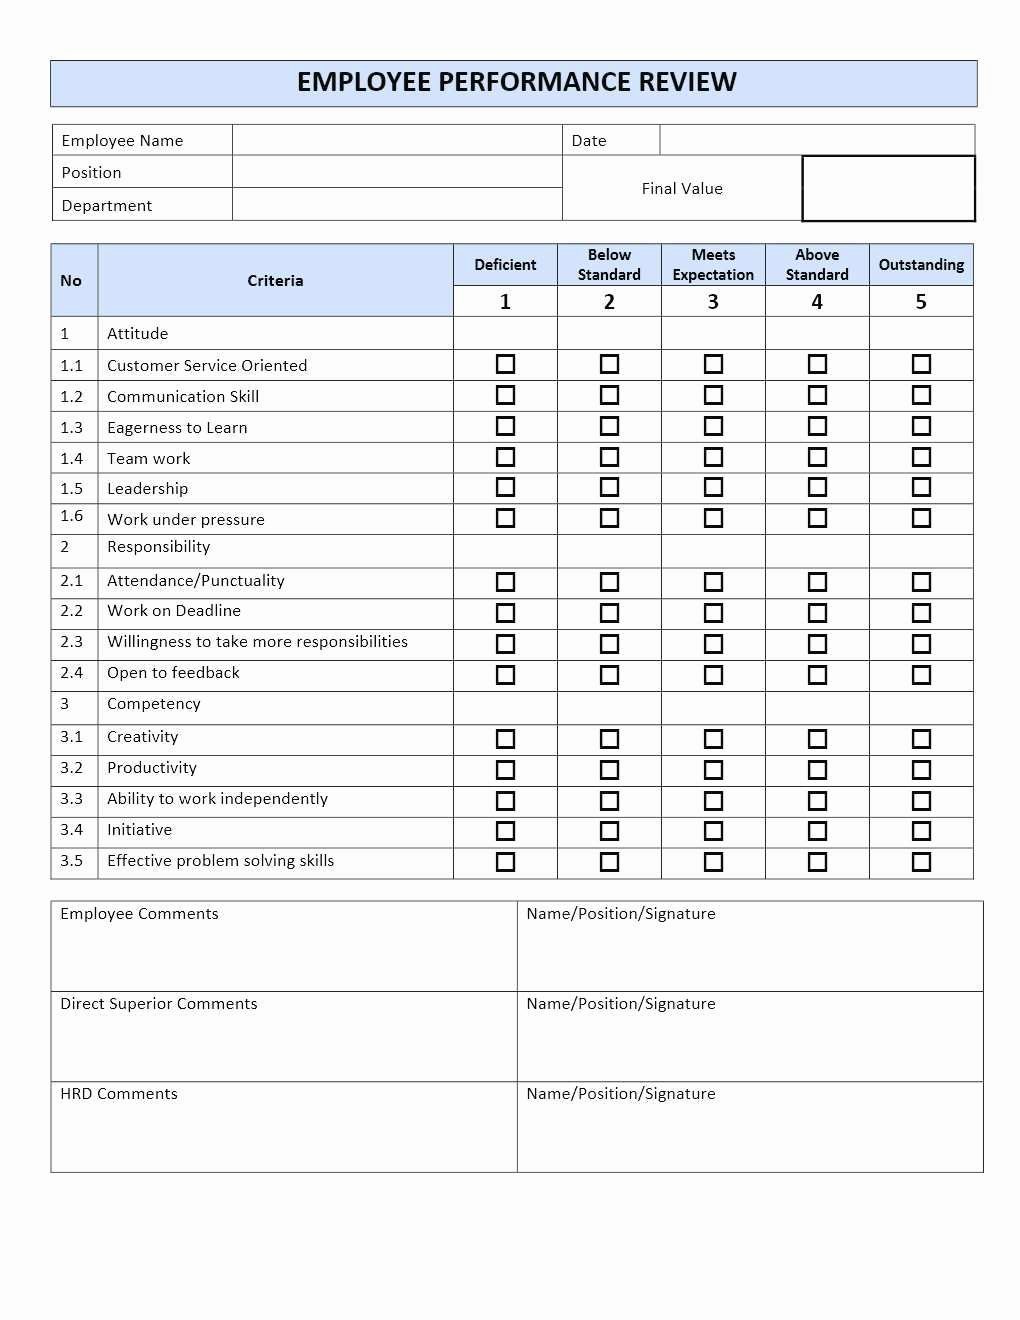 Employee Performance Review Template Excel Fresh Employee Performance Review Template Excel Unique